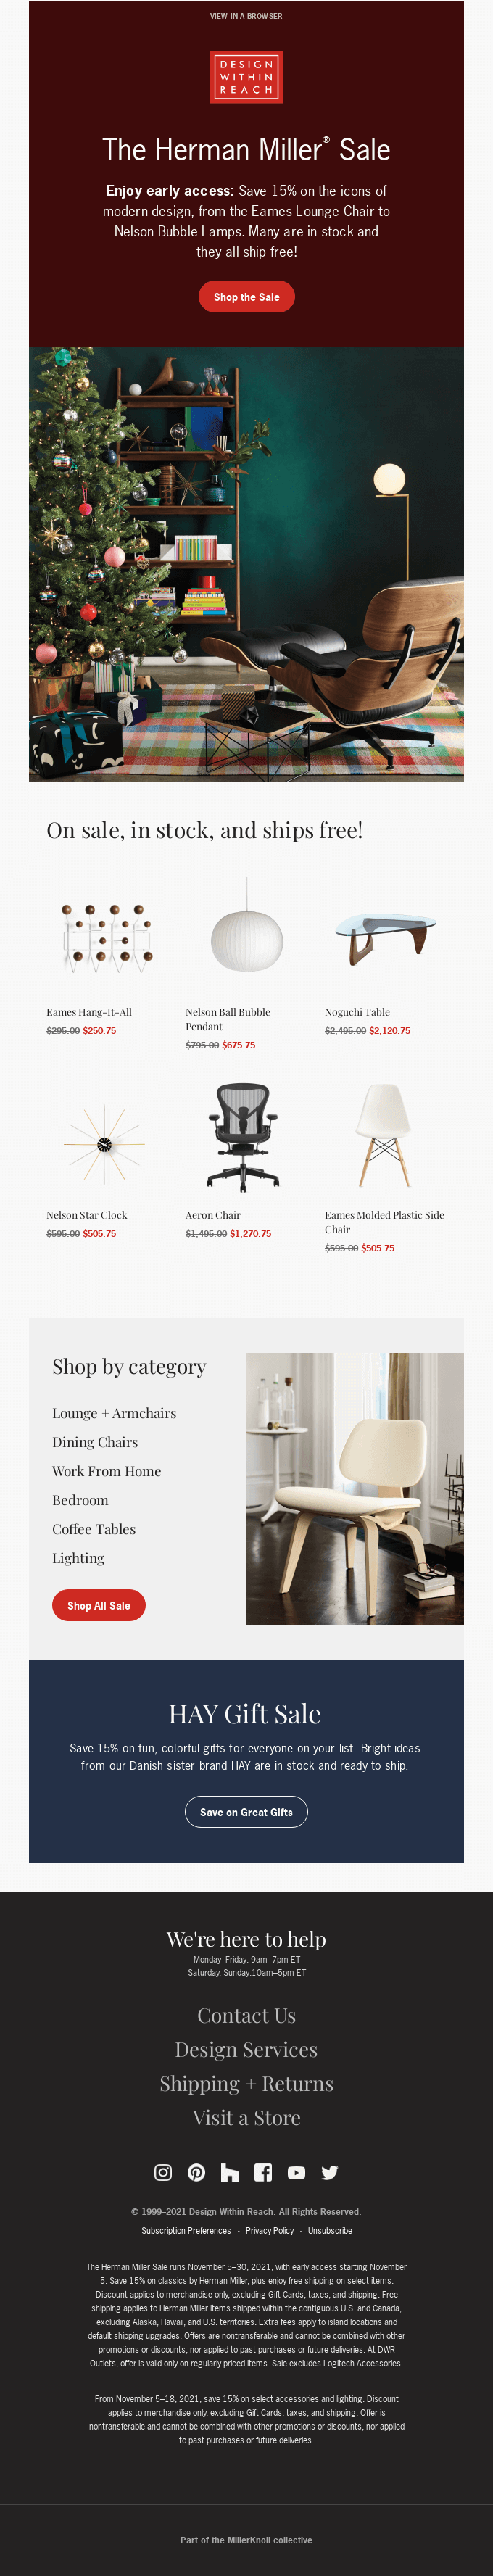 Special early access: The Herman Miller Sale